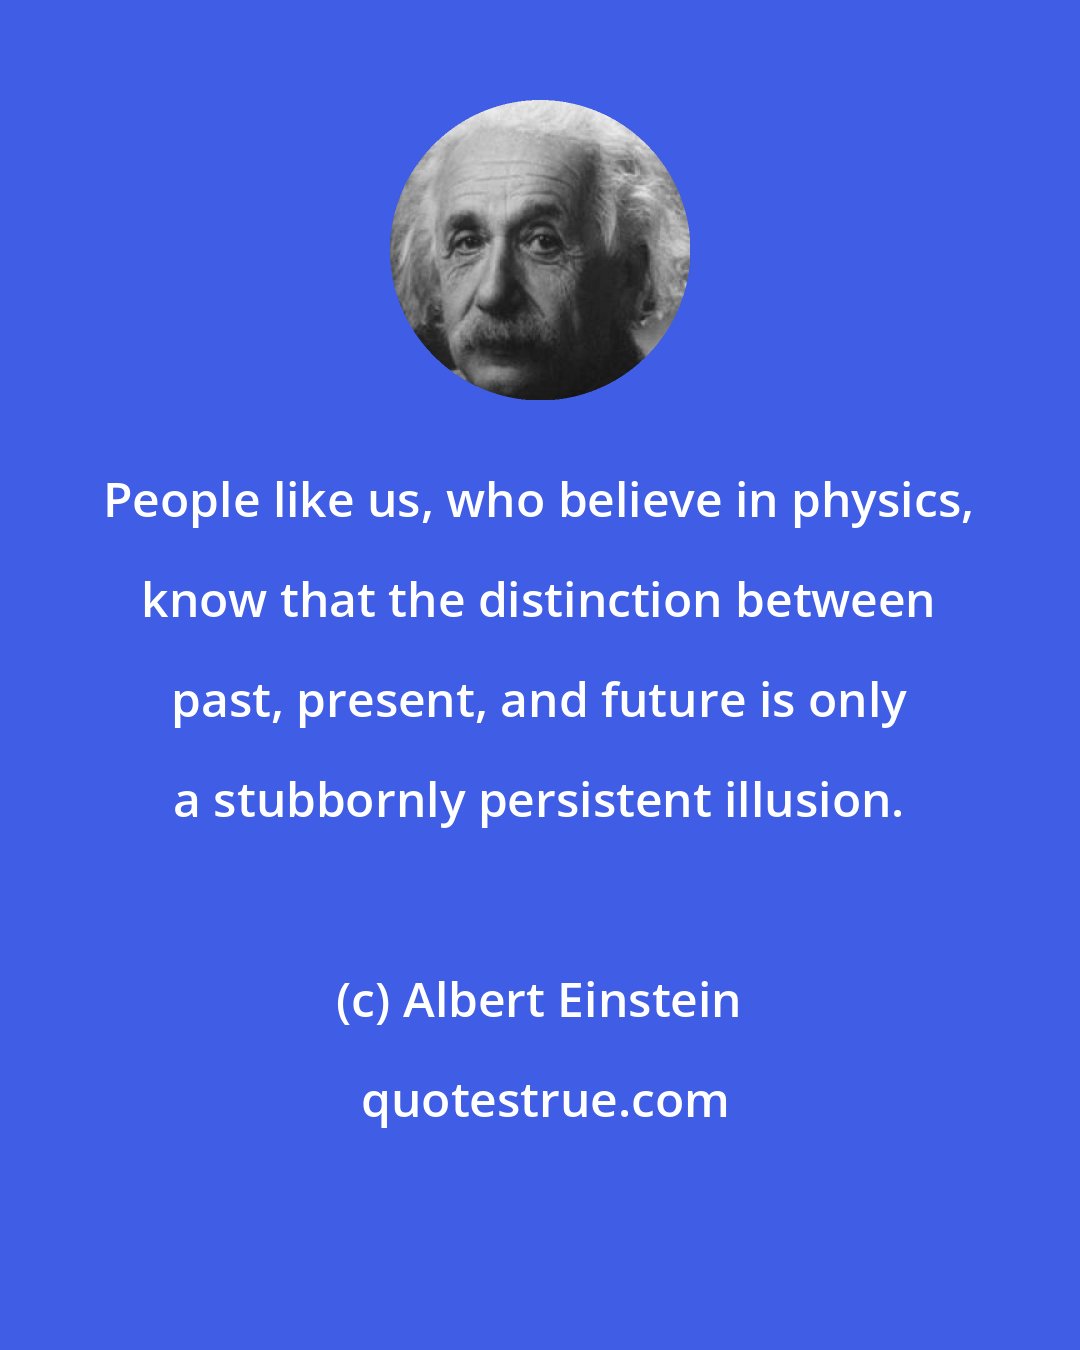 Albert Einstein: People like us, who believe in physics, know that the distinction between past, present, and future is only a stubbornly persistent illusion.